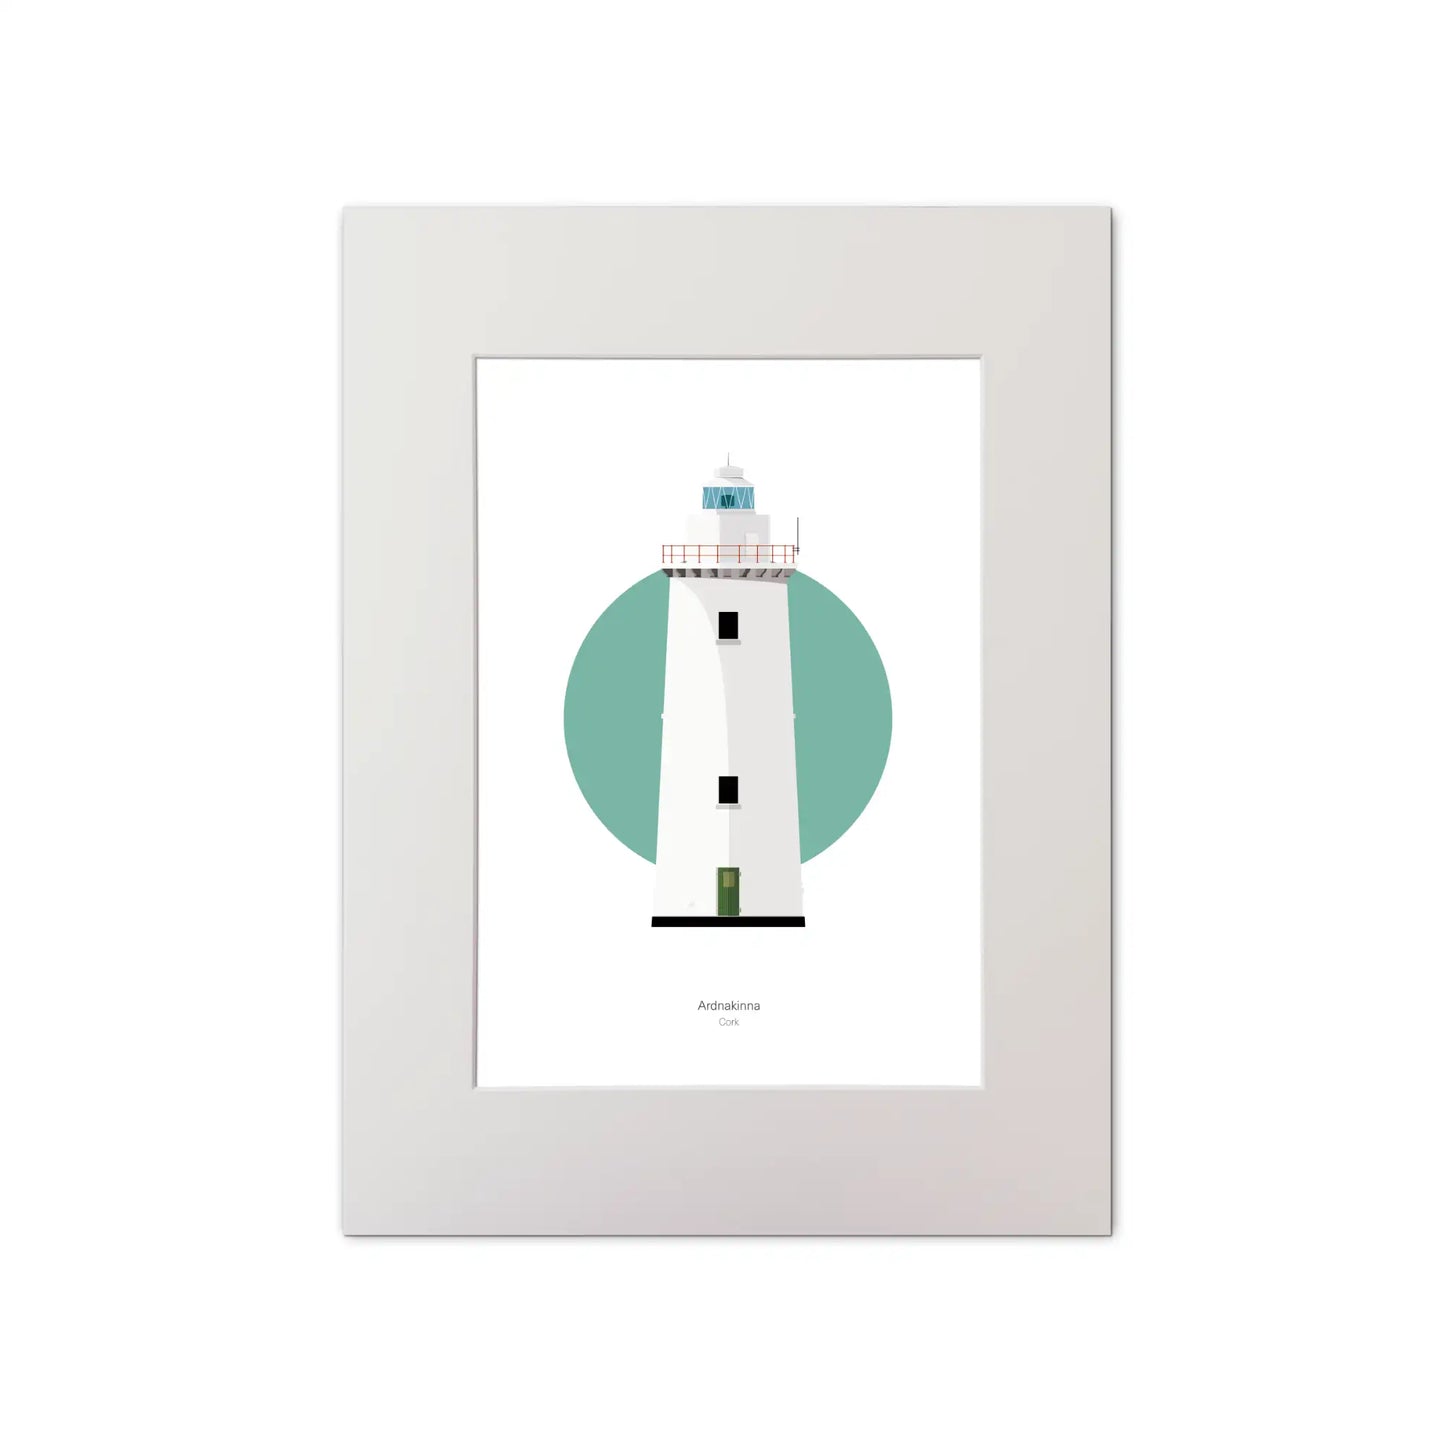 Illustration of Youghal lighthouse on a white background inside light blue square, mounted and measuring 30x40cm.